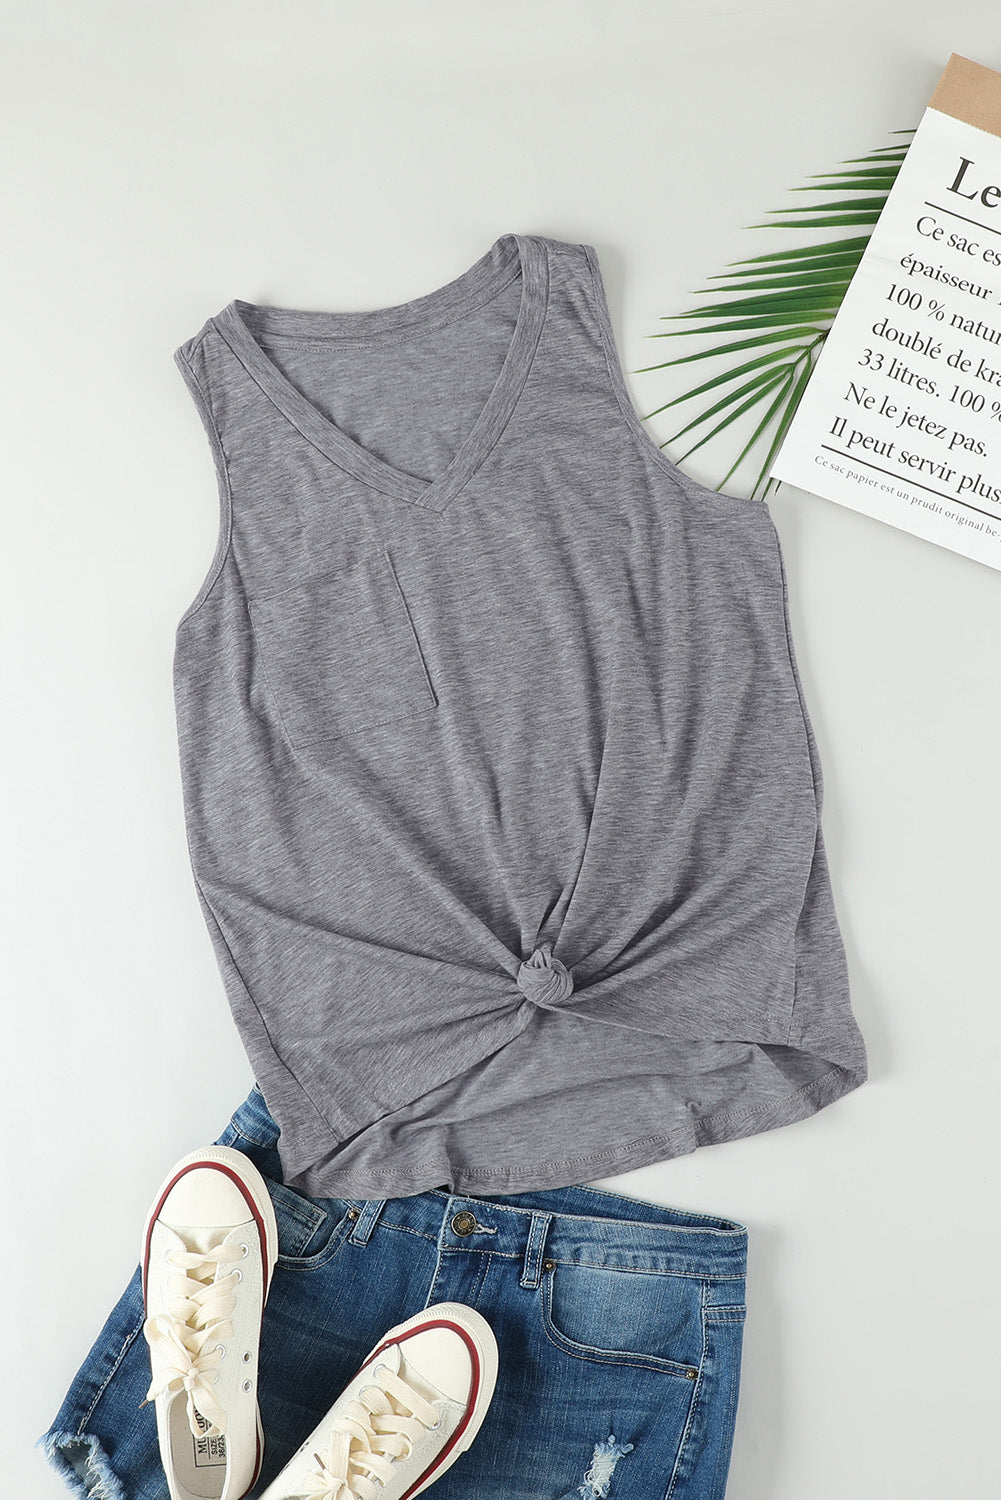 Gray Casual V Neck Racerback Tank Top With Pocket